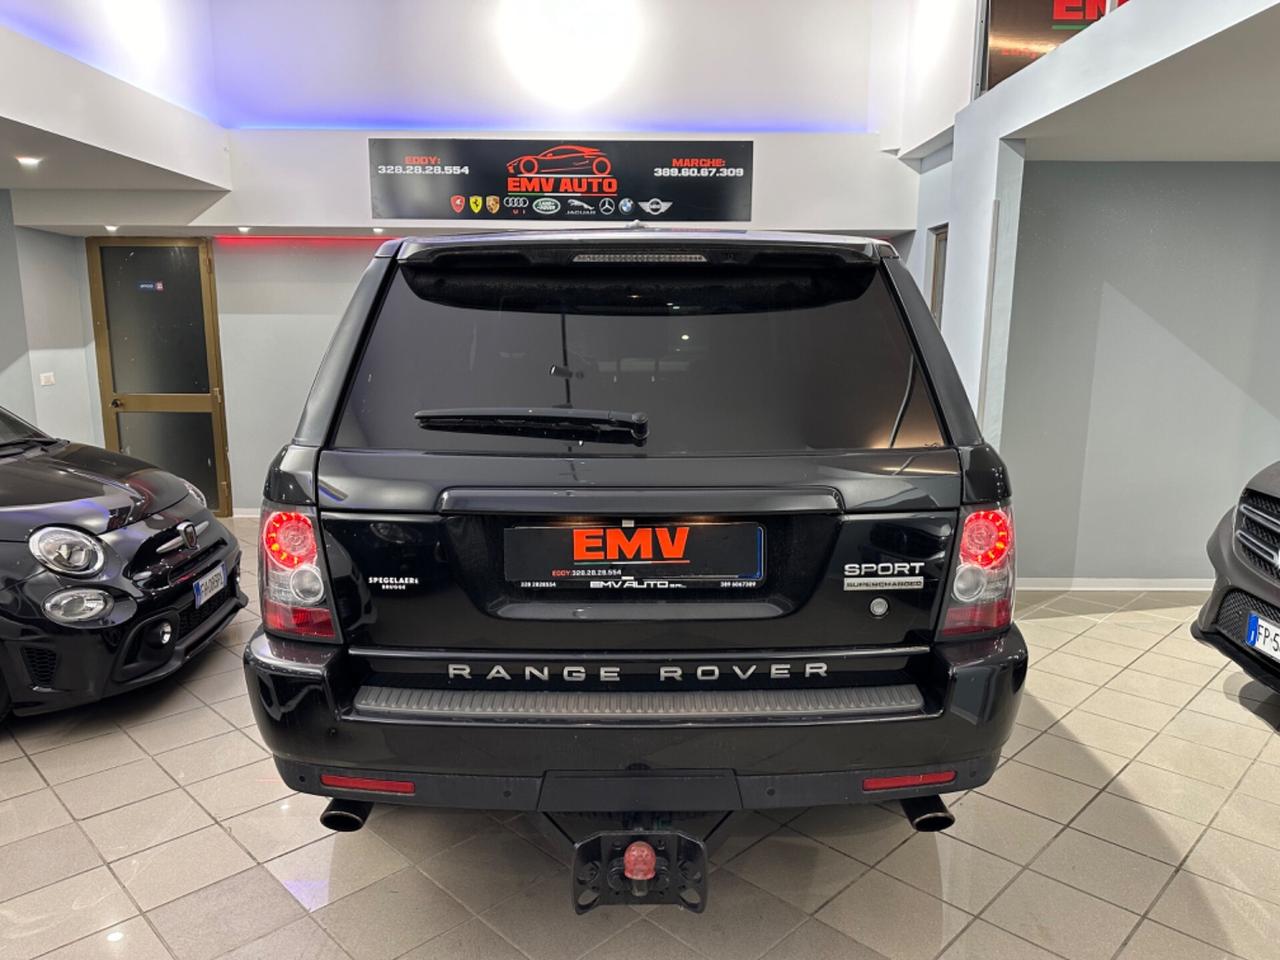 Land Rover Range Rover Sport Range Rover Sport 5.0 V8 Supercharged HSE Dynamic